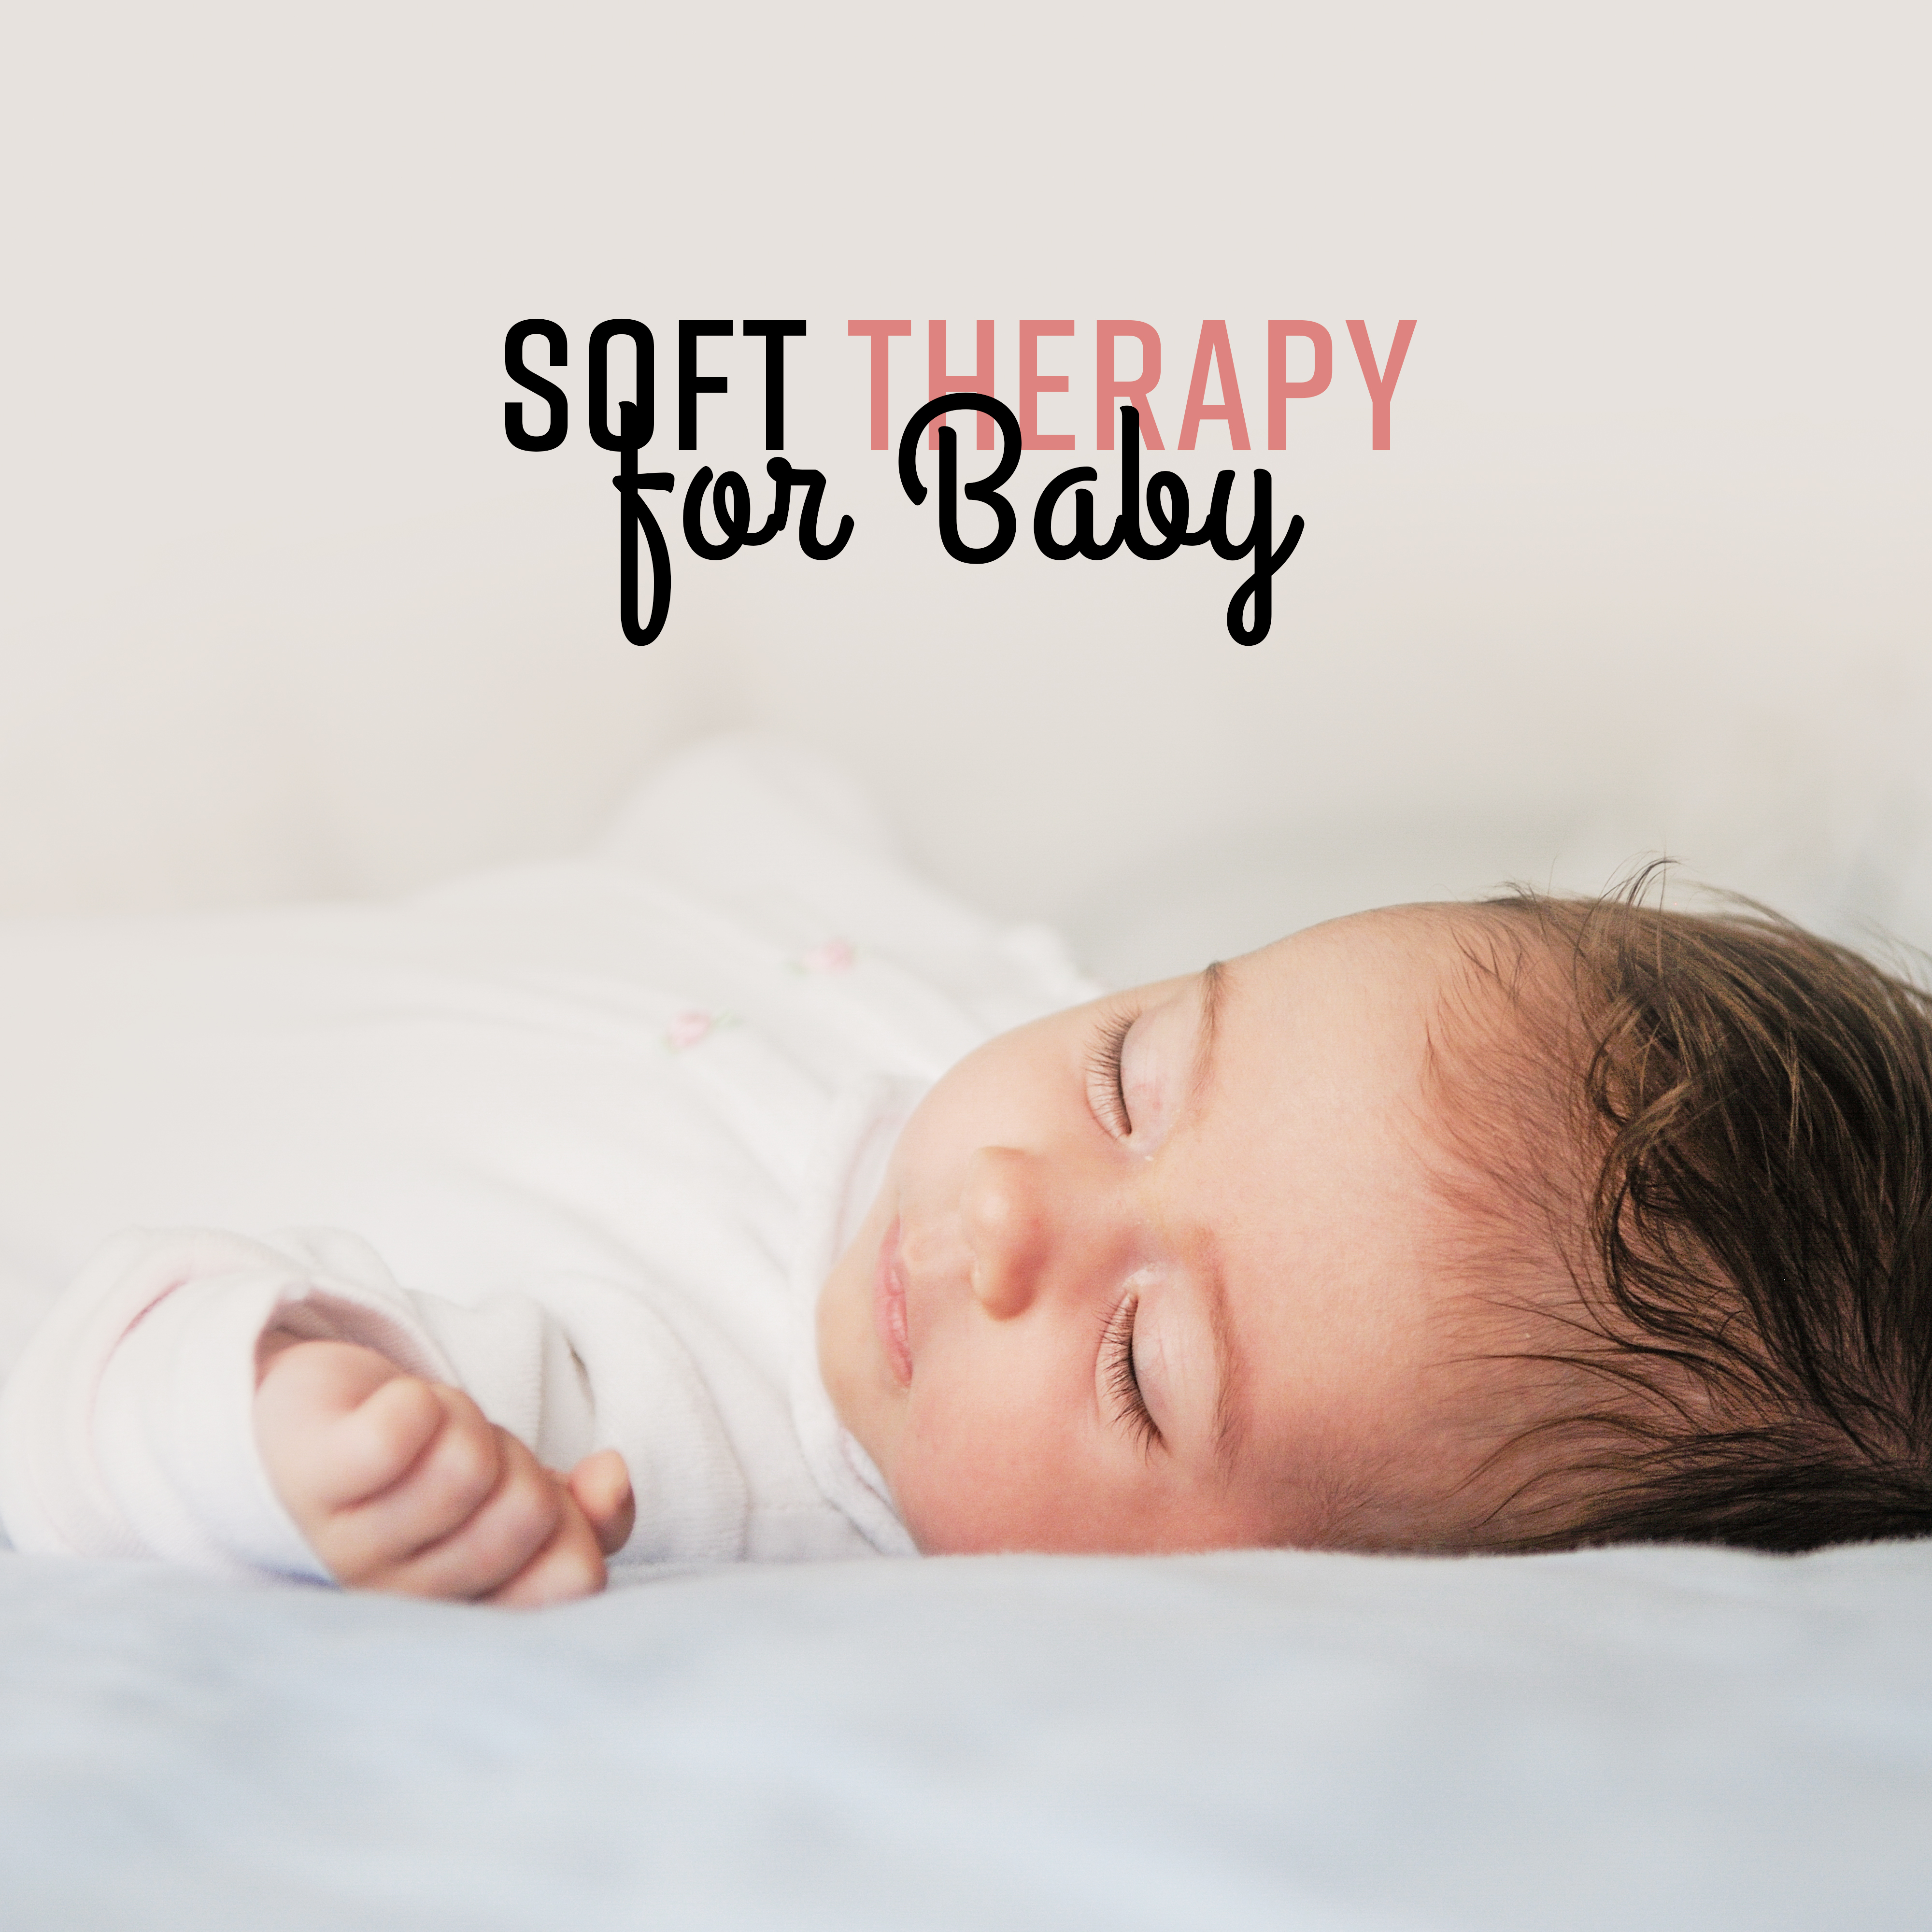 Soft Therapy for Baby